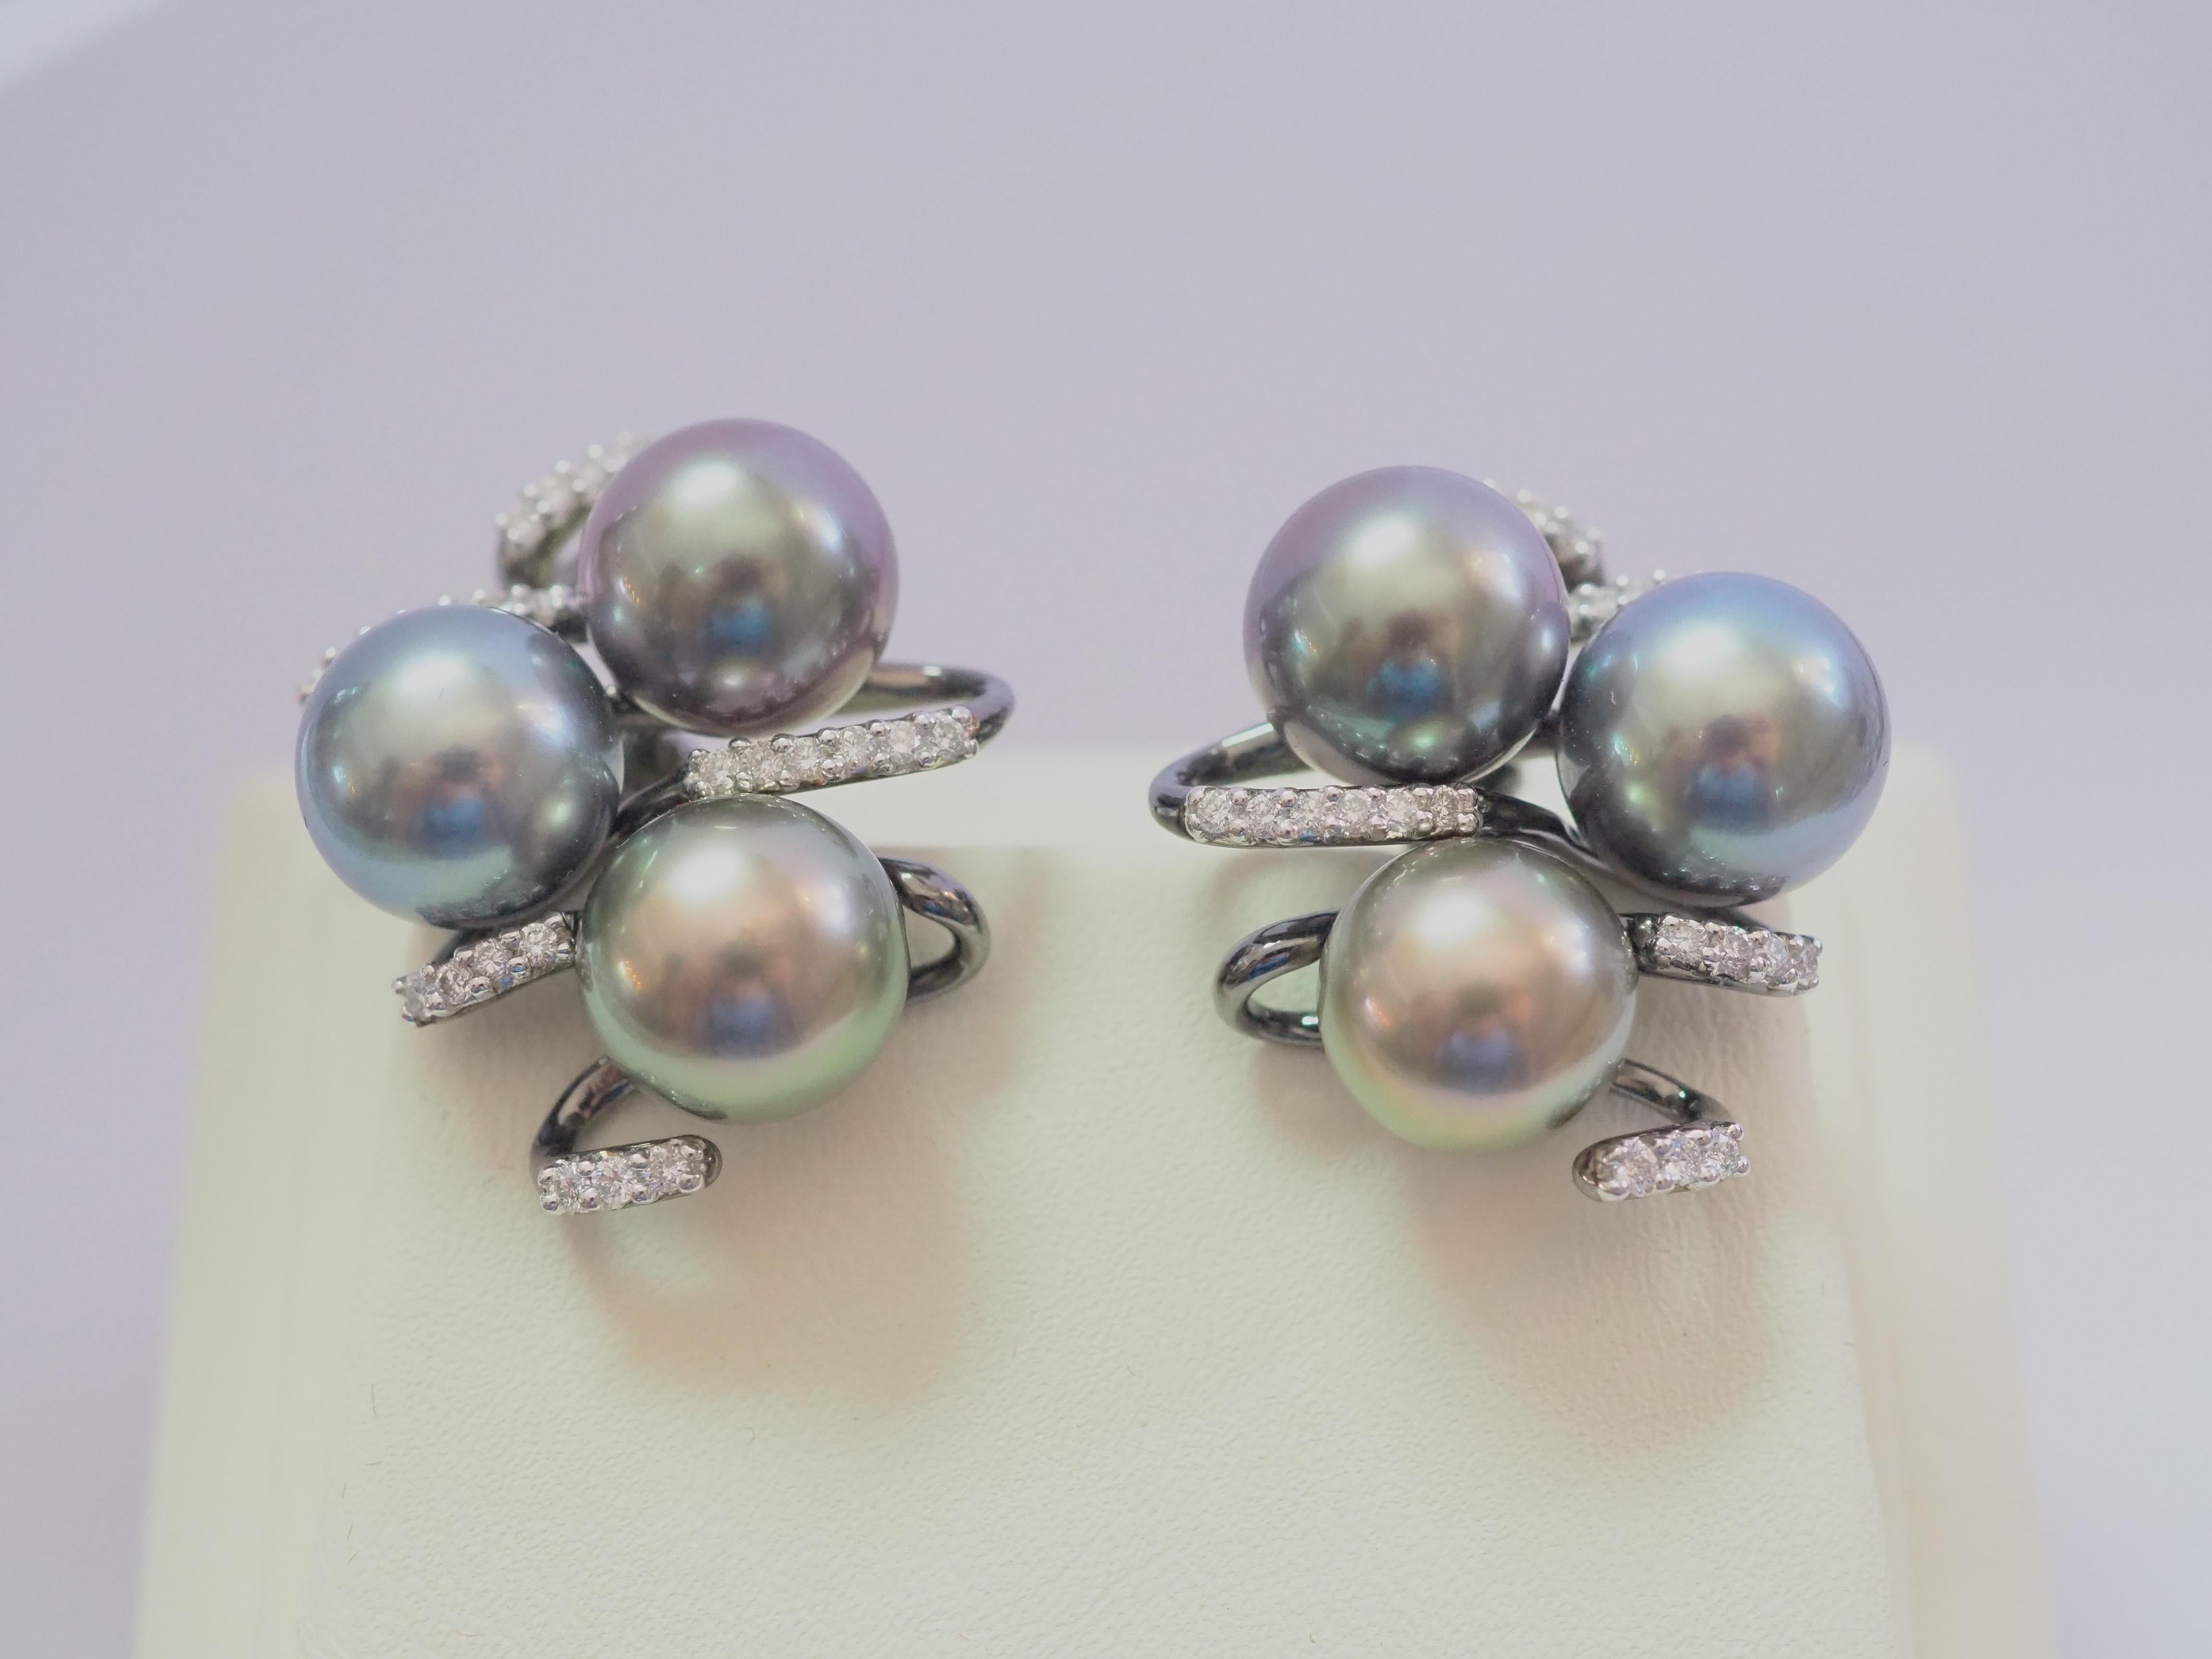 Awesome piece of jewelry and stunning in every way. This magnificent and creative latch- back earring uses varieties of hues of Tahiti Sea pearls very nicely. The metal work is also elegant with lots of curves. There are 6 pearls with many color